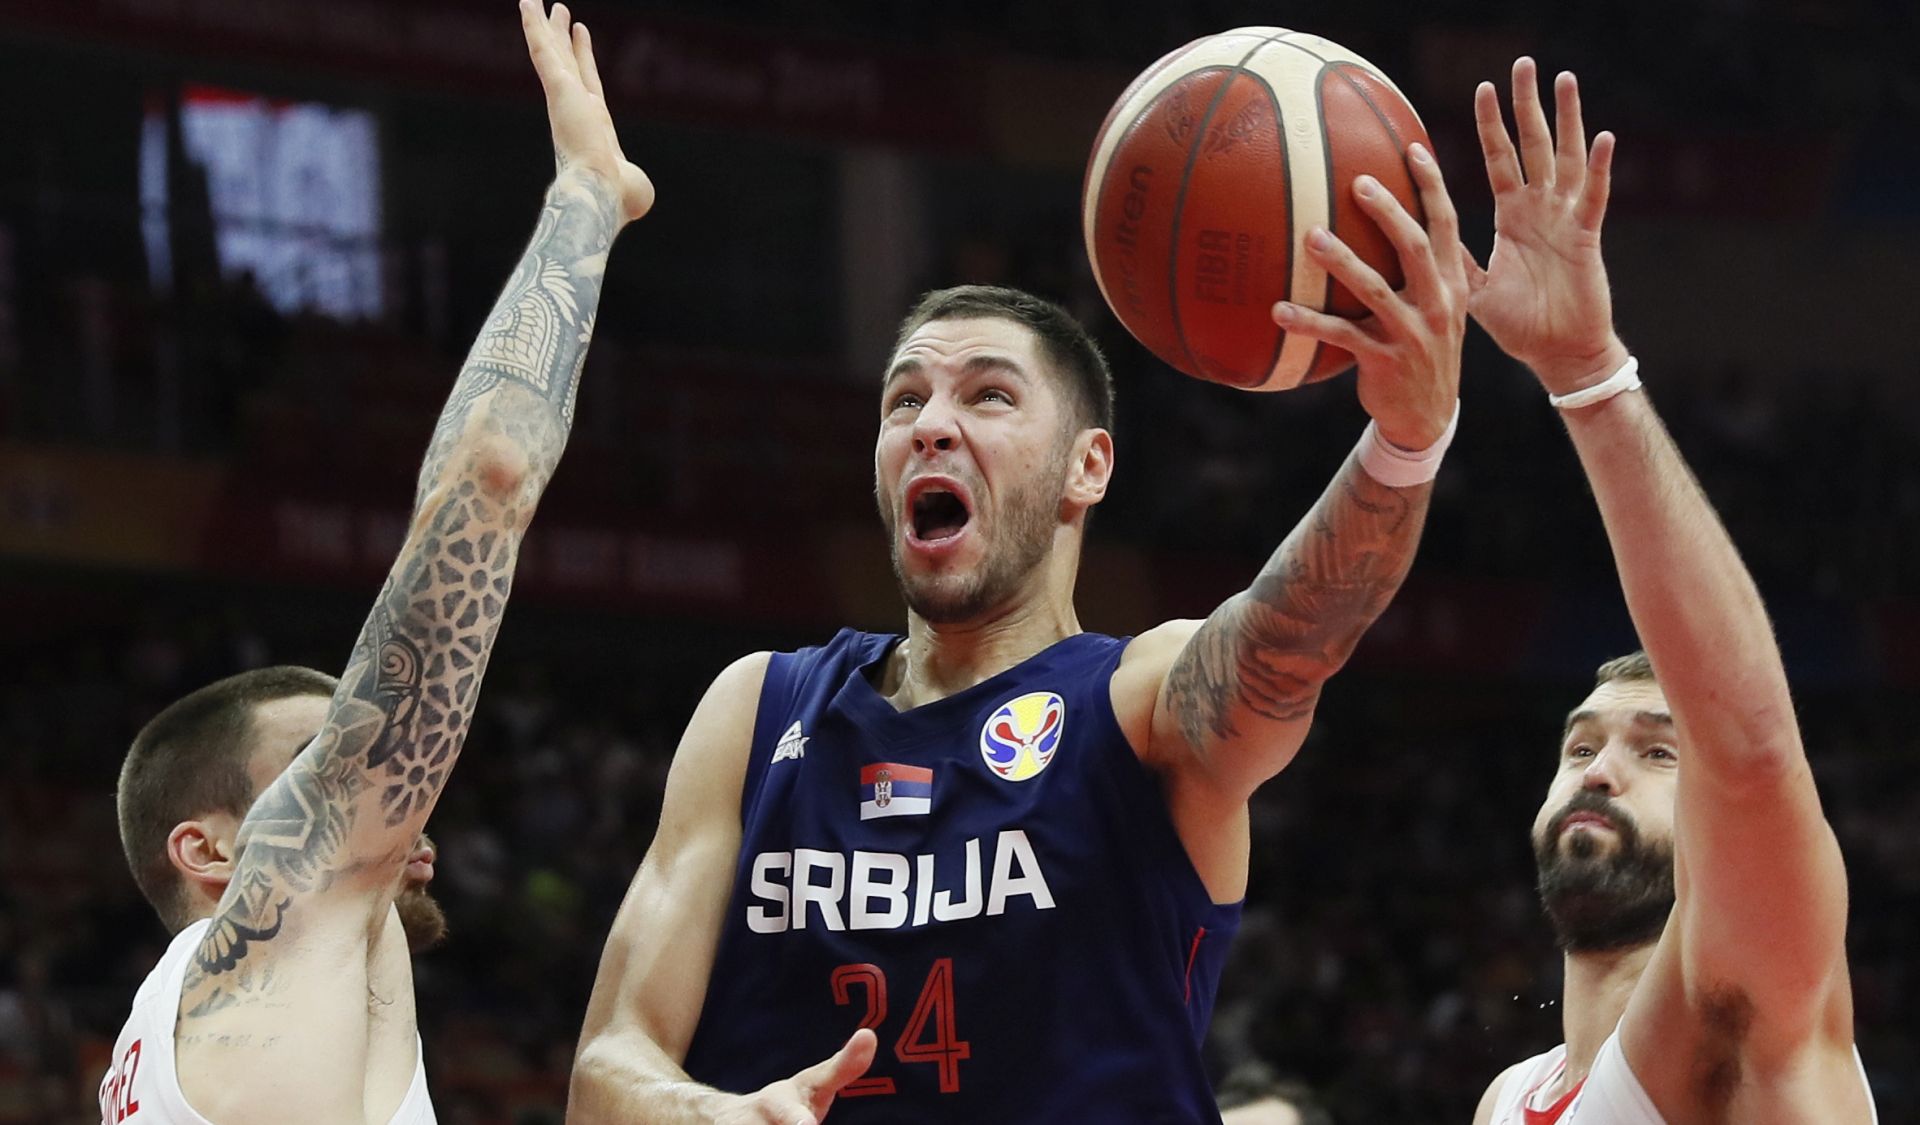 epa07827752 Stefan Jovic (C) of Serbia in action during the FIBA Basketball World Cup 2019 match between Spain and Serbia in Wuhan, China, 08 September 2019.  EPA/MADE NAGI